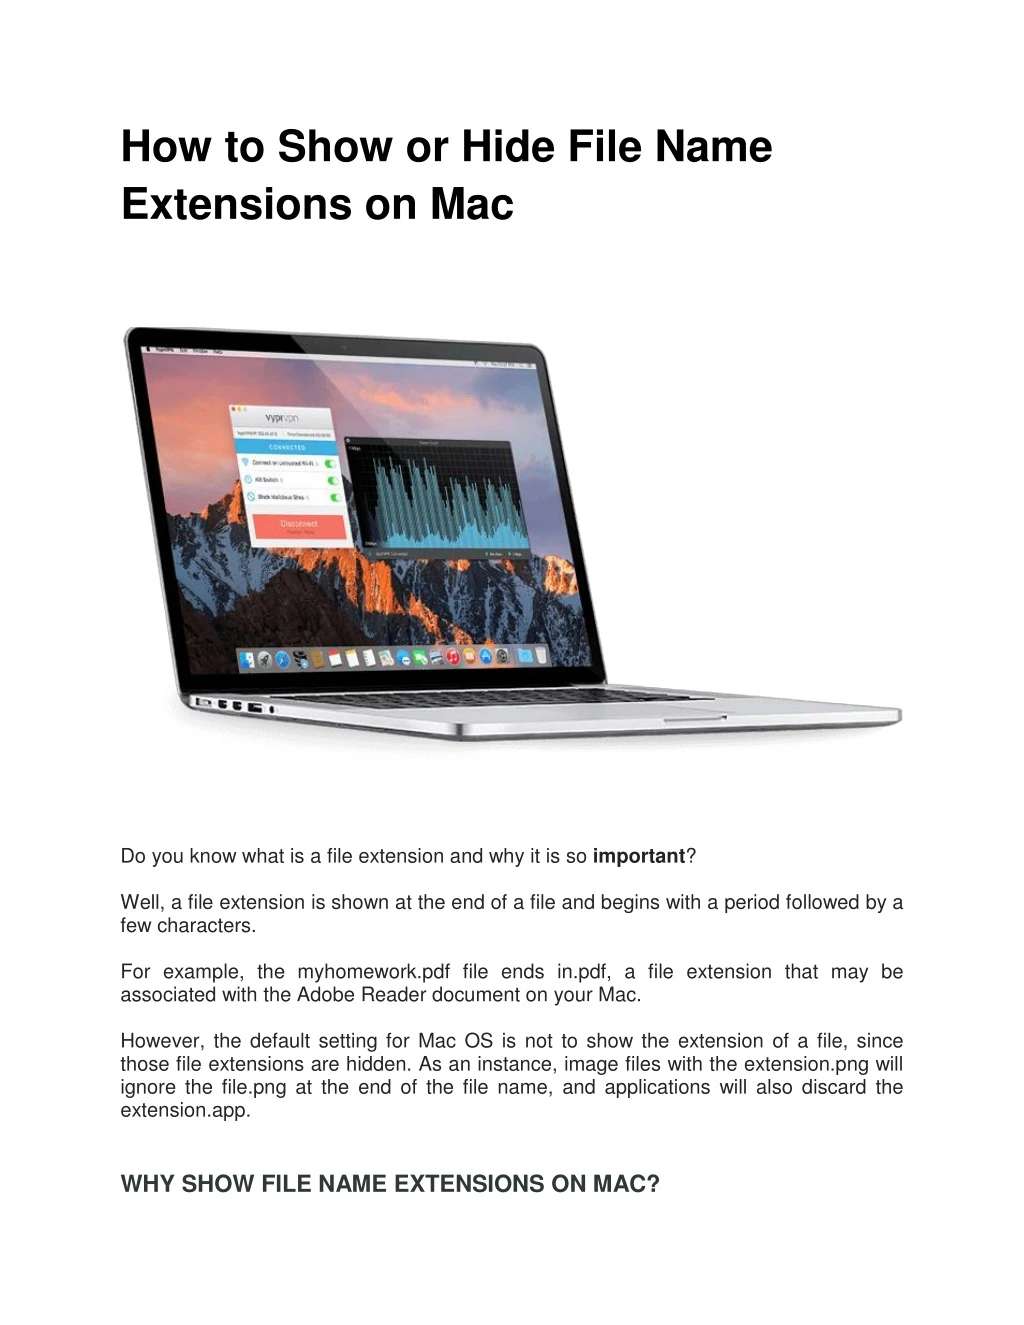 how to show or hide file name extensions on mac